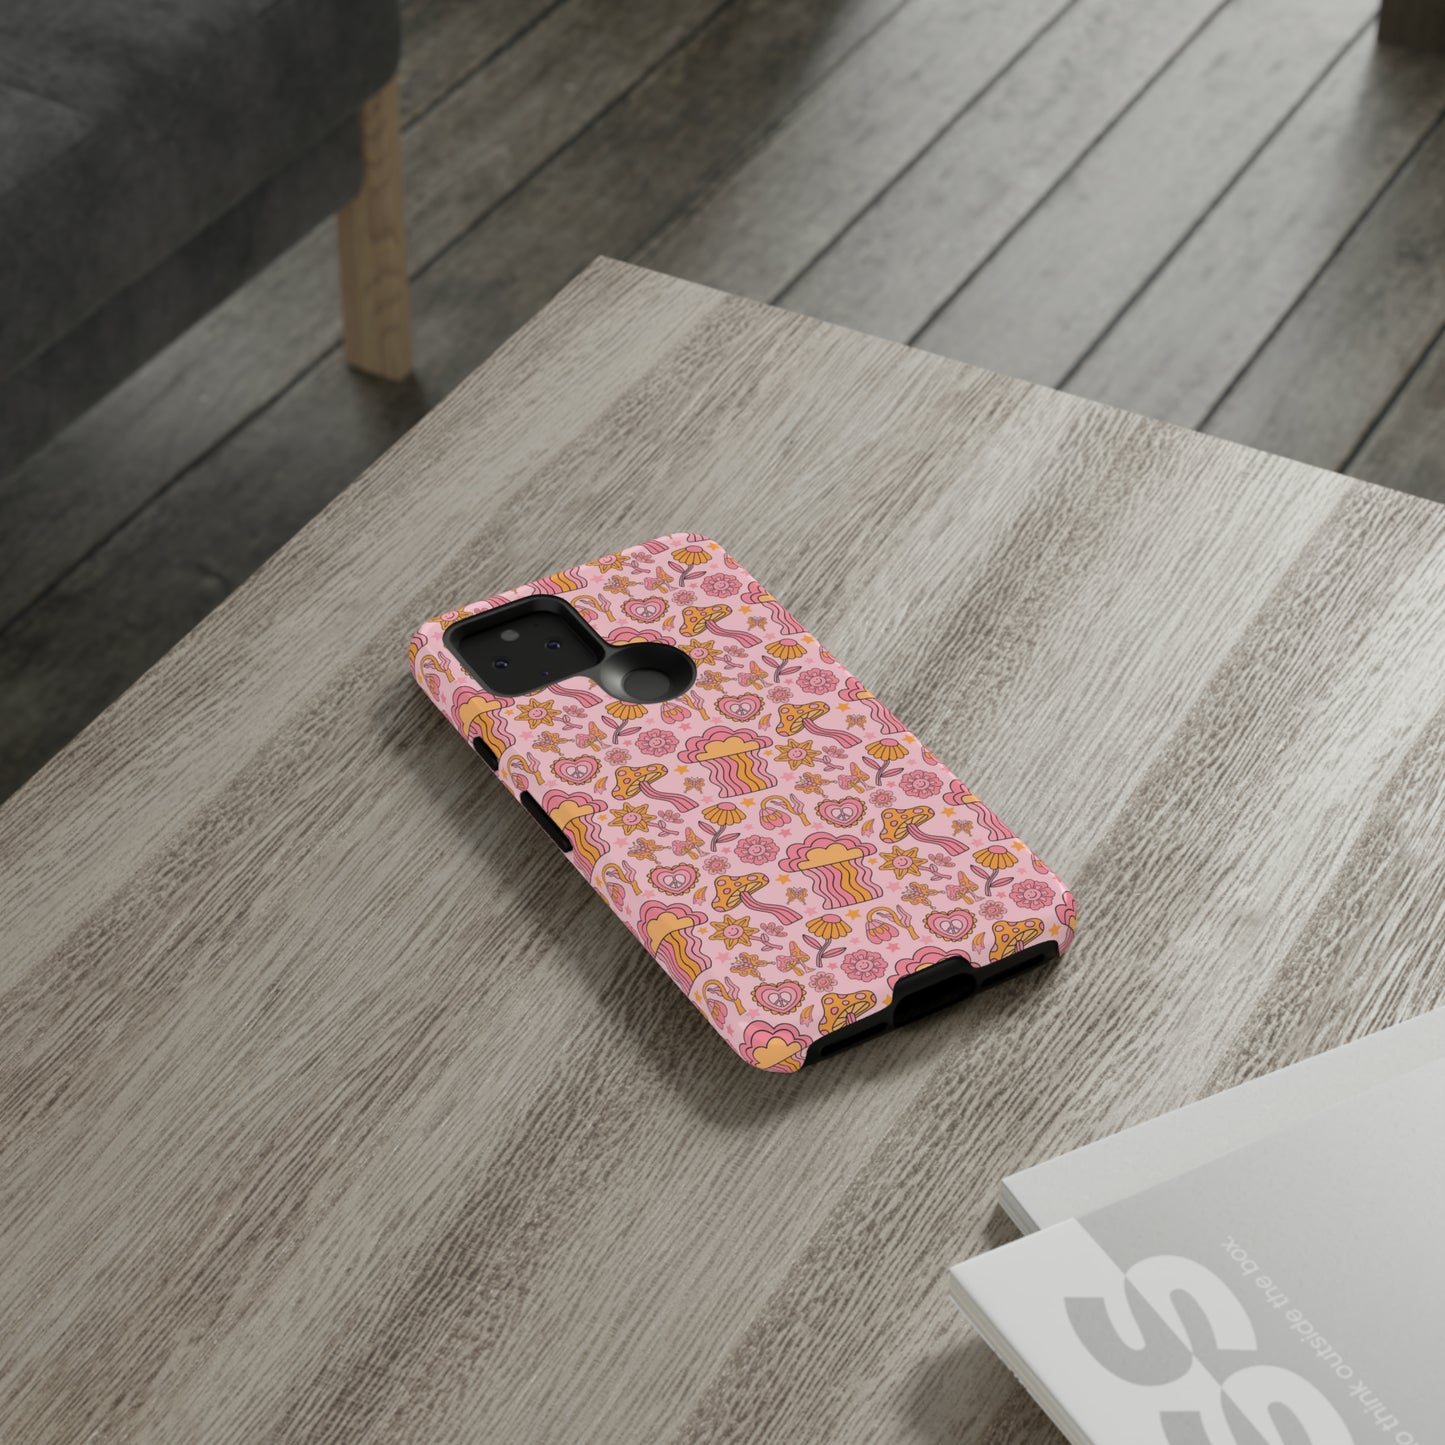 Groovy Tough Phone Case for Iphones, Samsungs, and Google phones